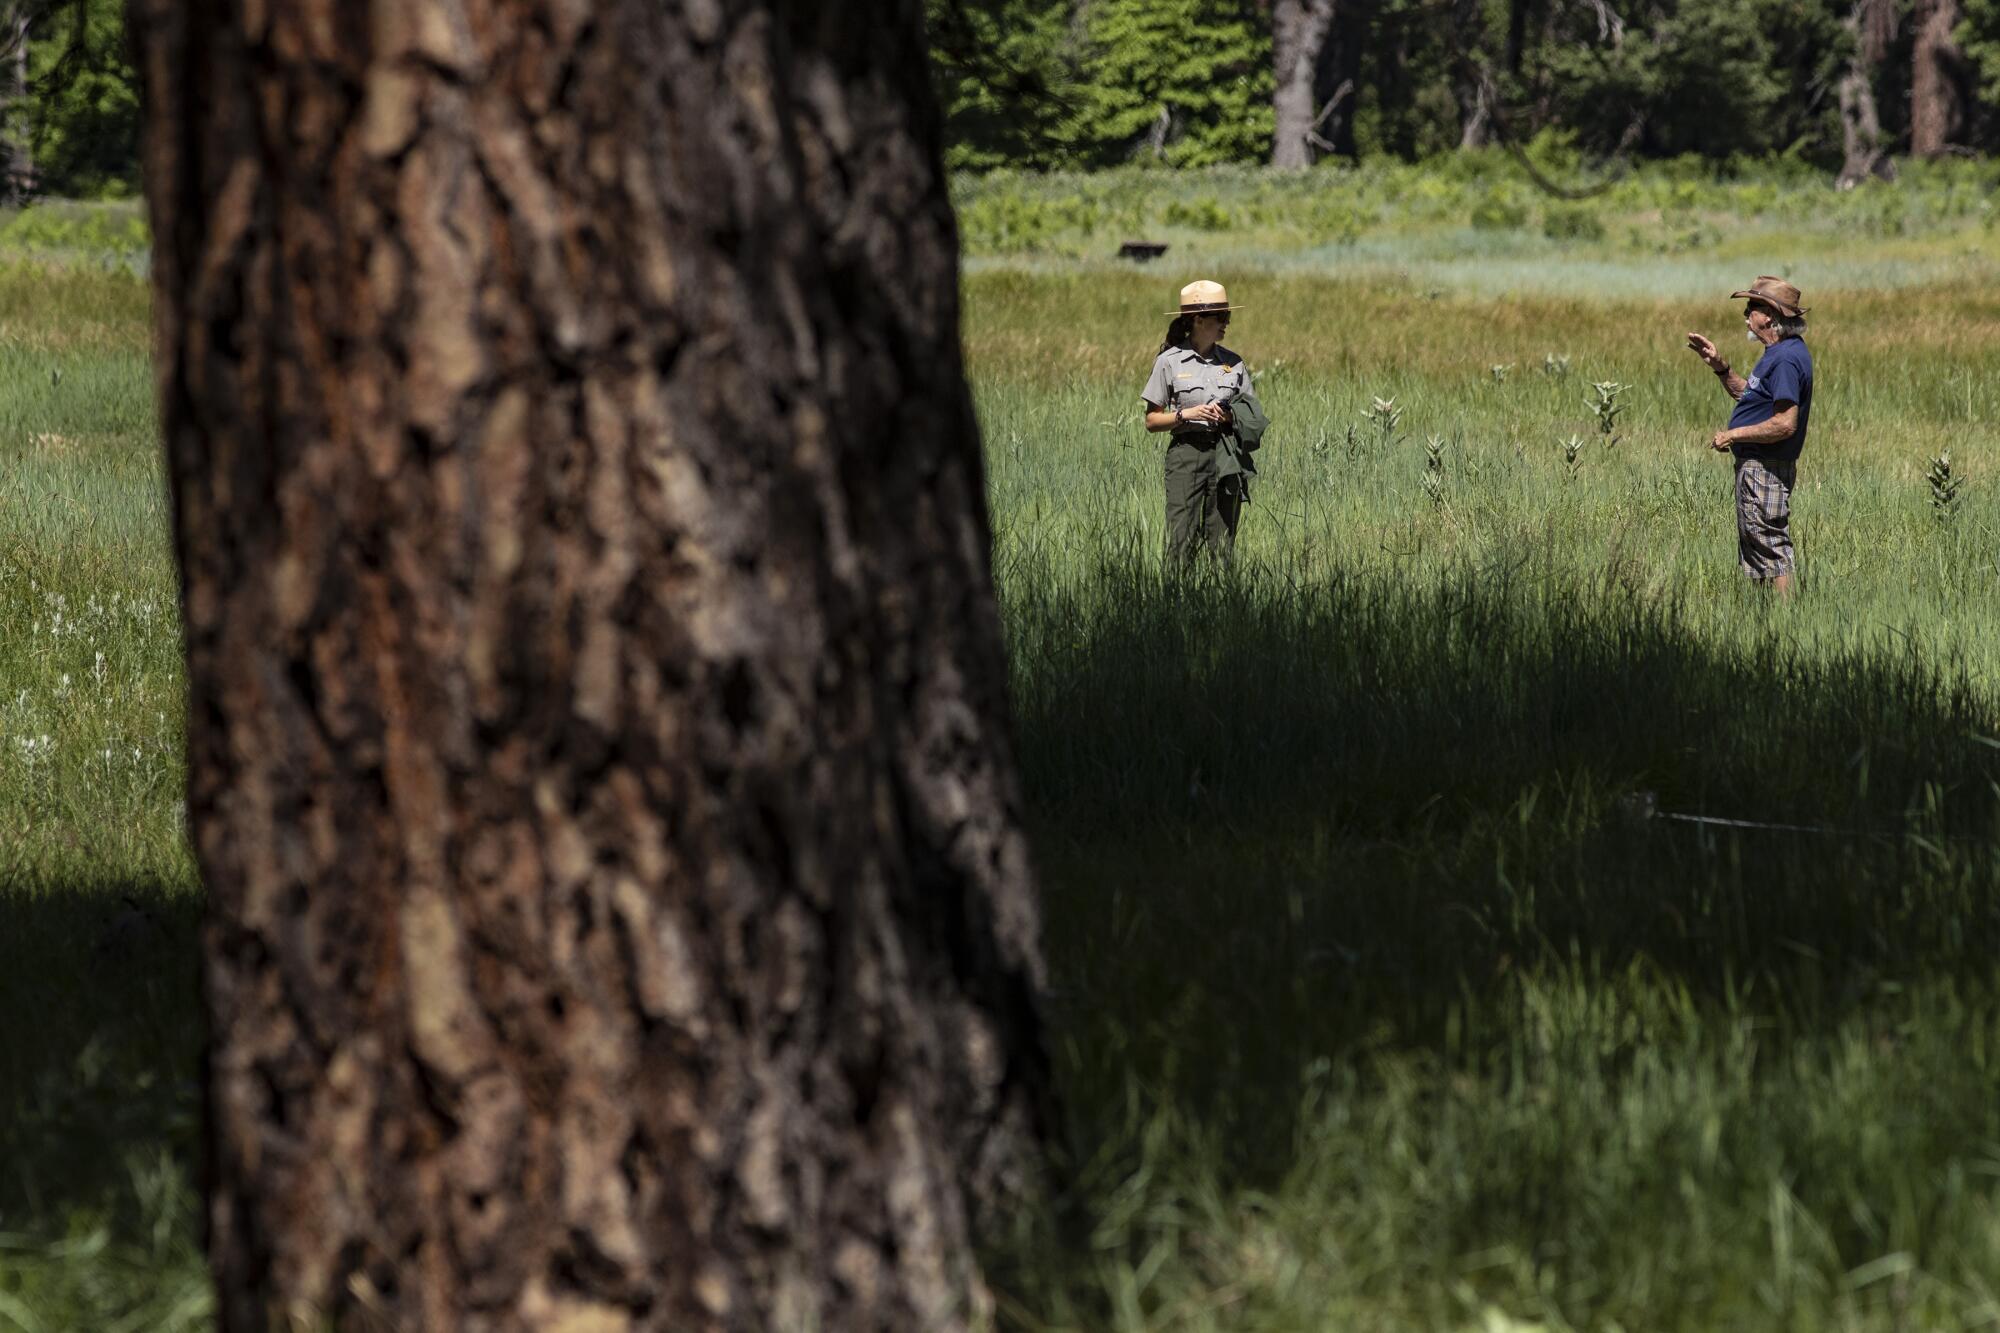 Park ranger Jamie Jirele maintains social distancing as she chats with a visitor in a meadow in Yosemite Valley.